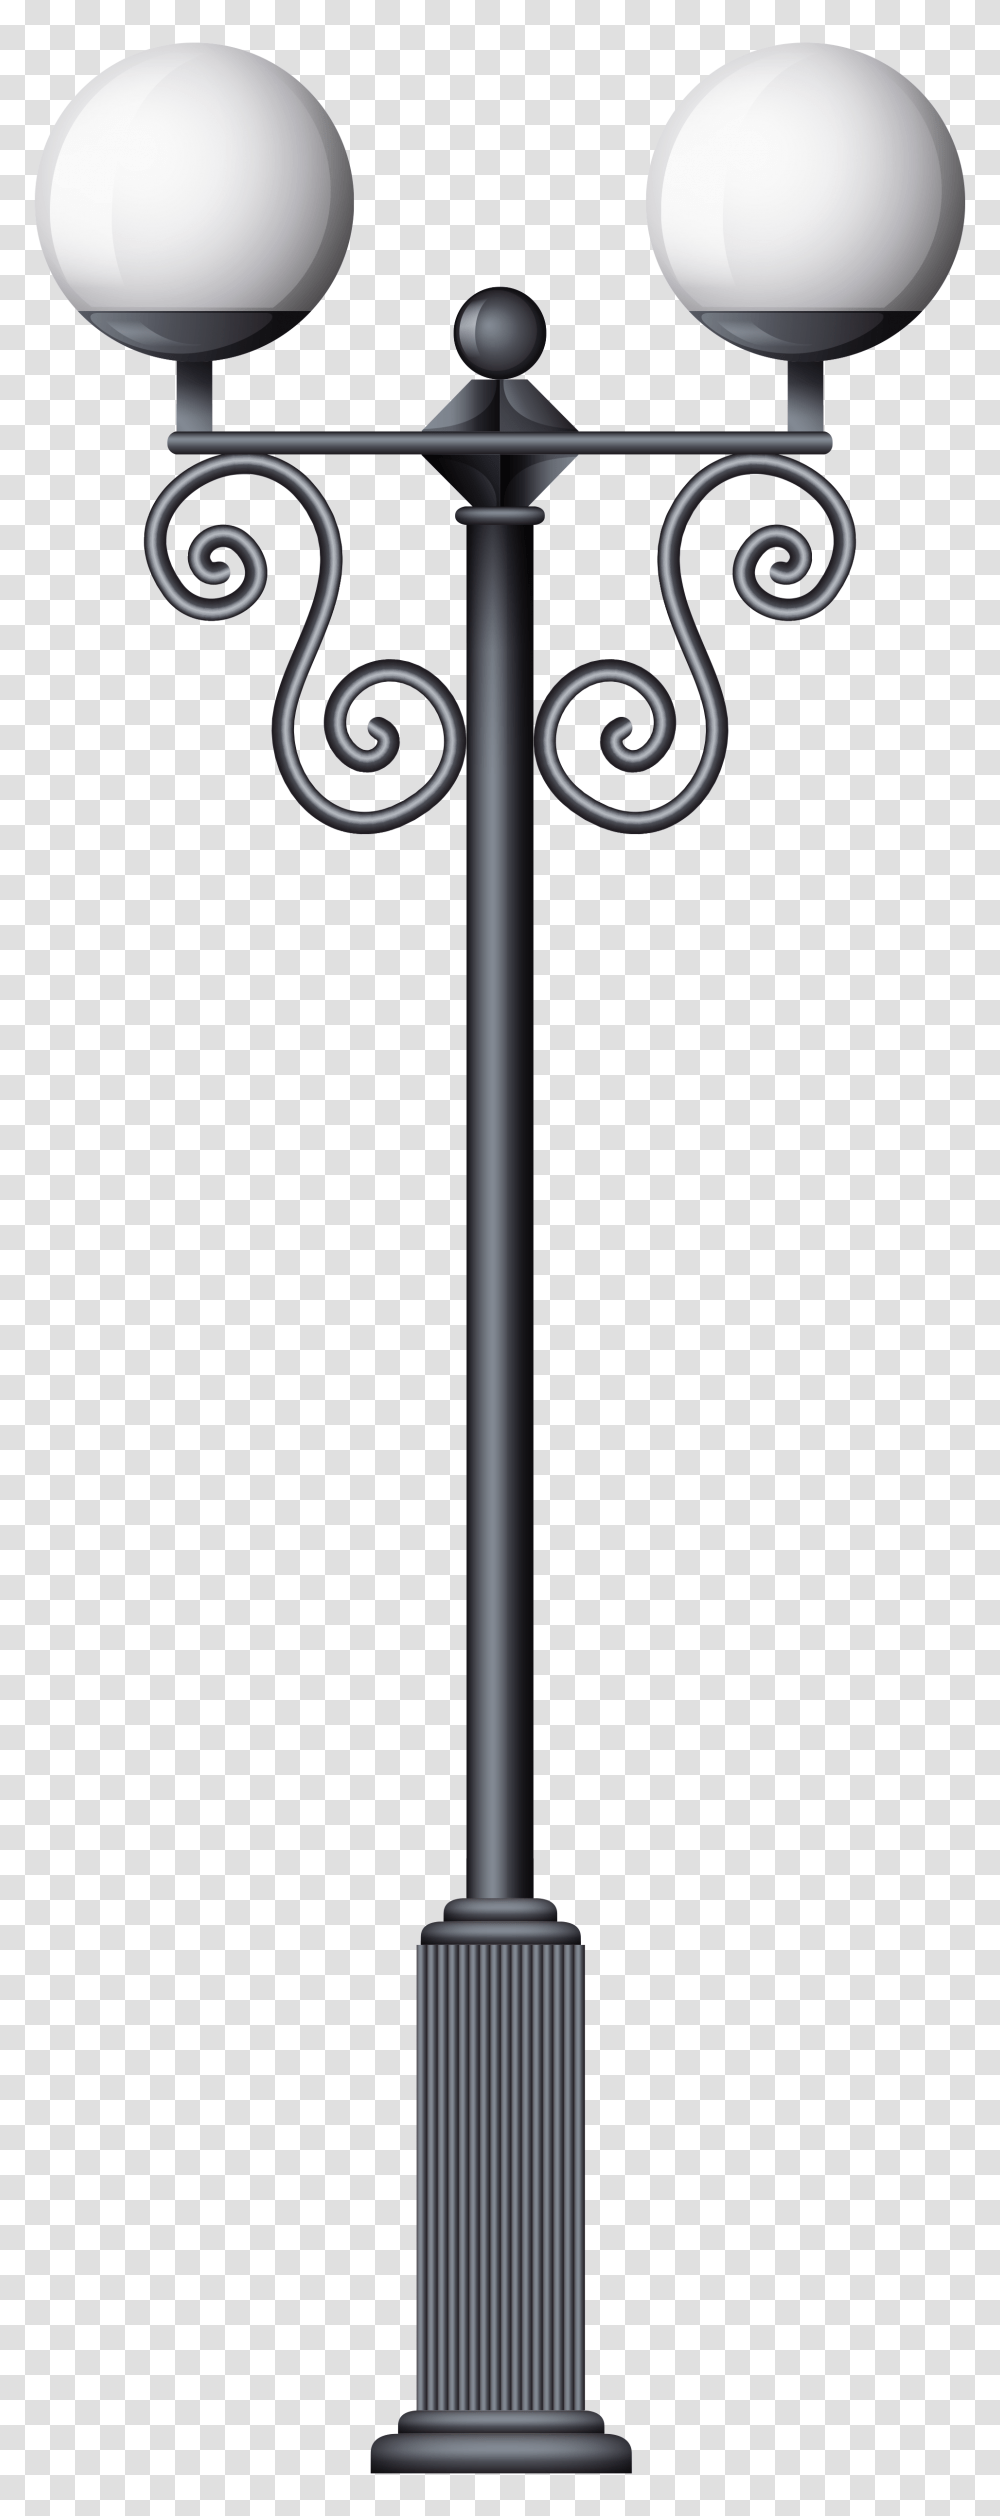 Streetlight Clip Art, Weapon, Weaponry, Silhouette, Cosmetics Transparent Png